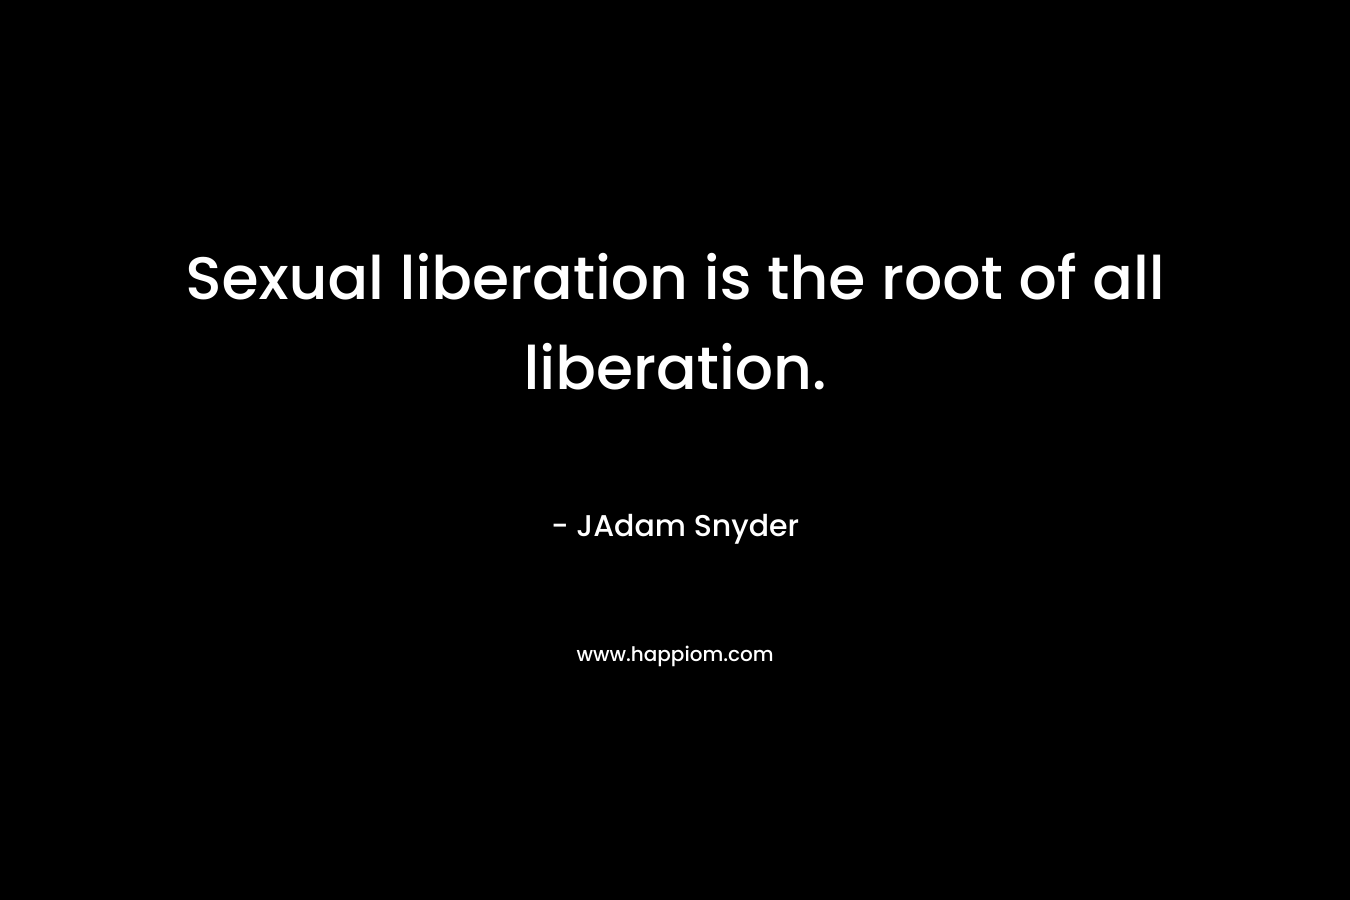 Sexual liberation is the root of all liberation.